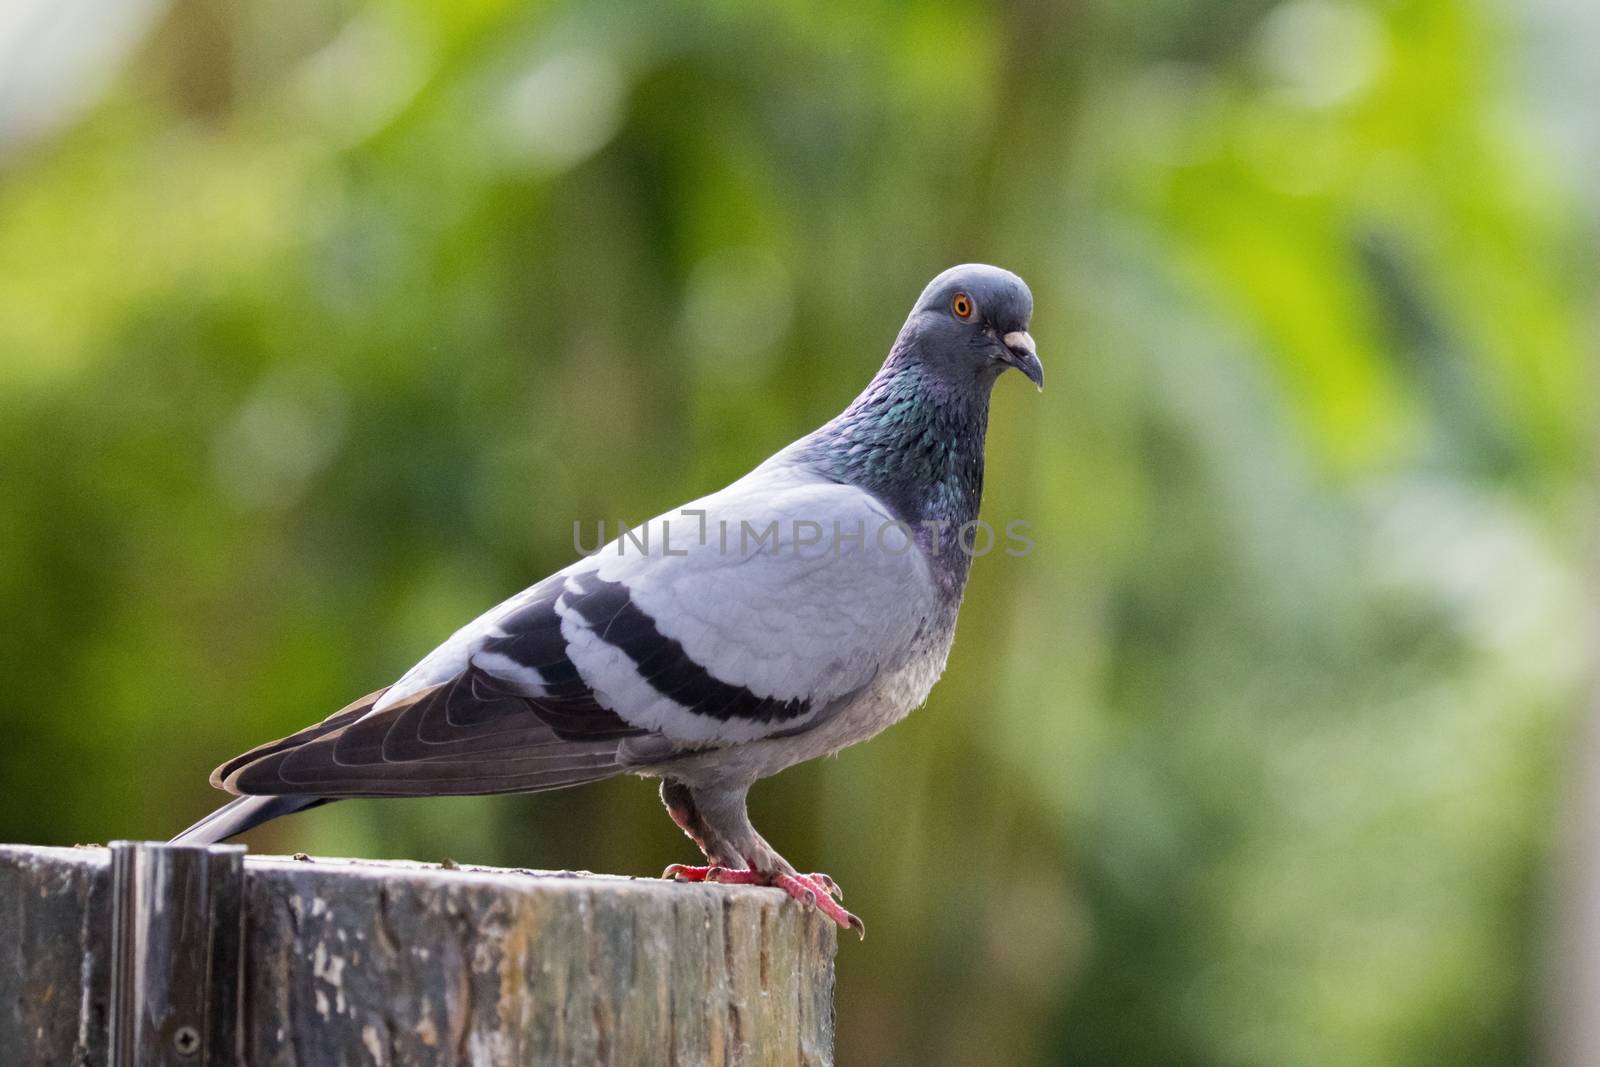 Image of a pigeon on nature background in thailand. Wild Animals.